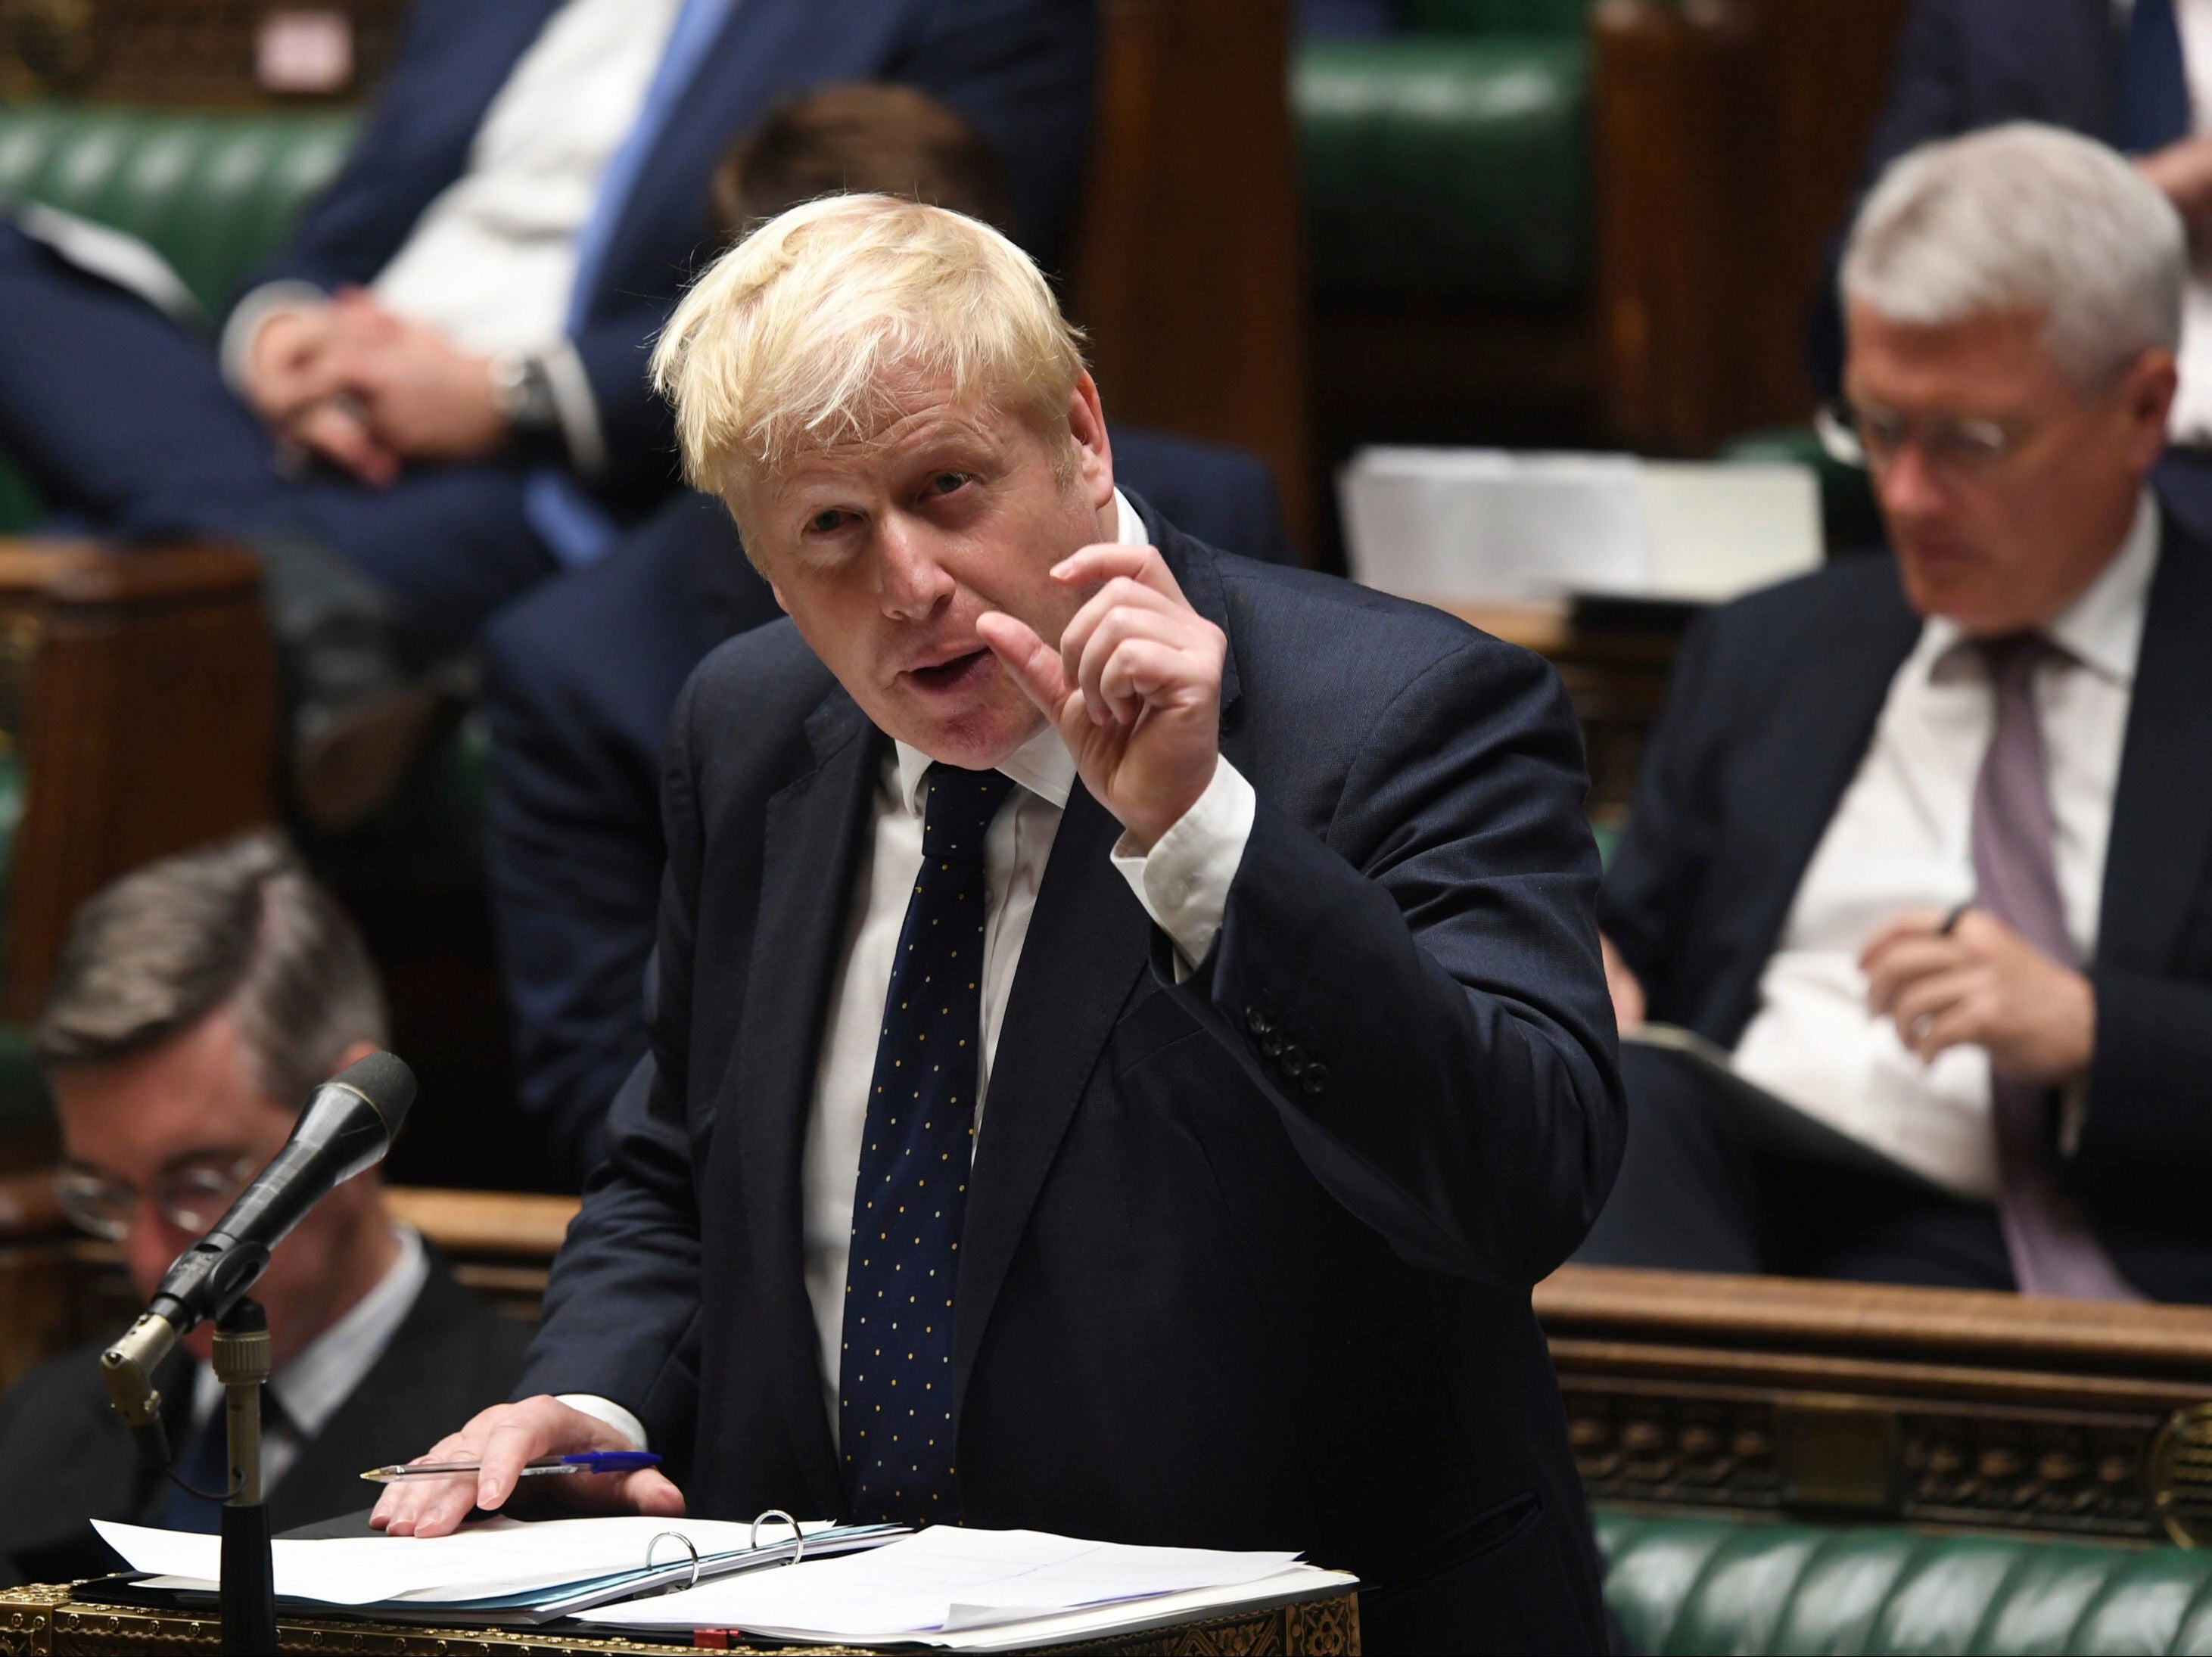 Boris Johnson announces a 1.25 per cent increase in national insurance to pay for health and social care on Tuesday